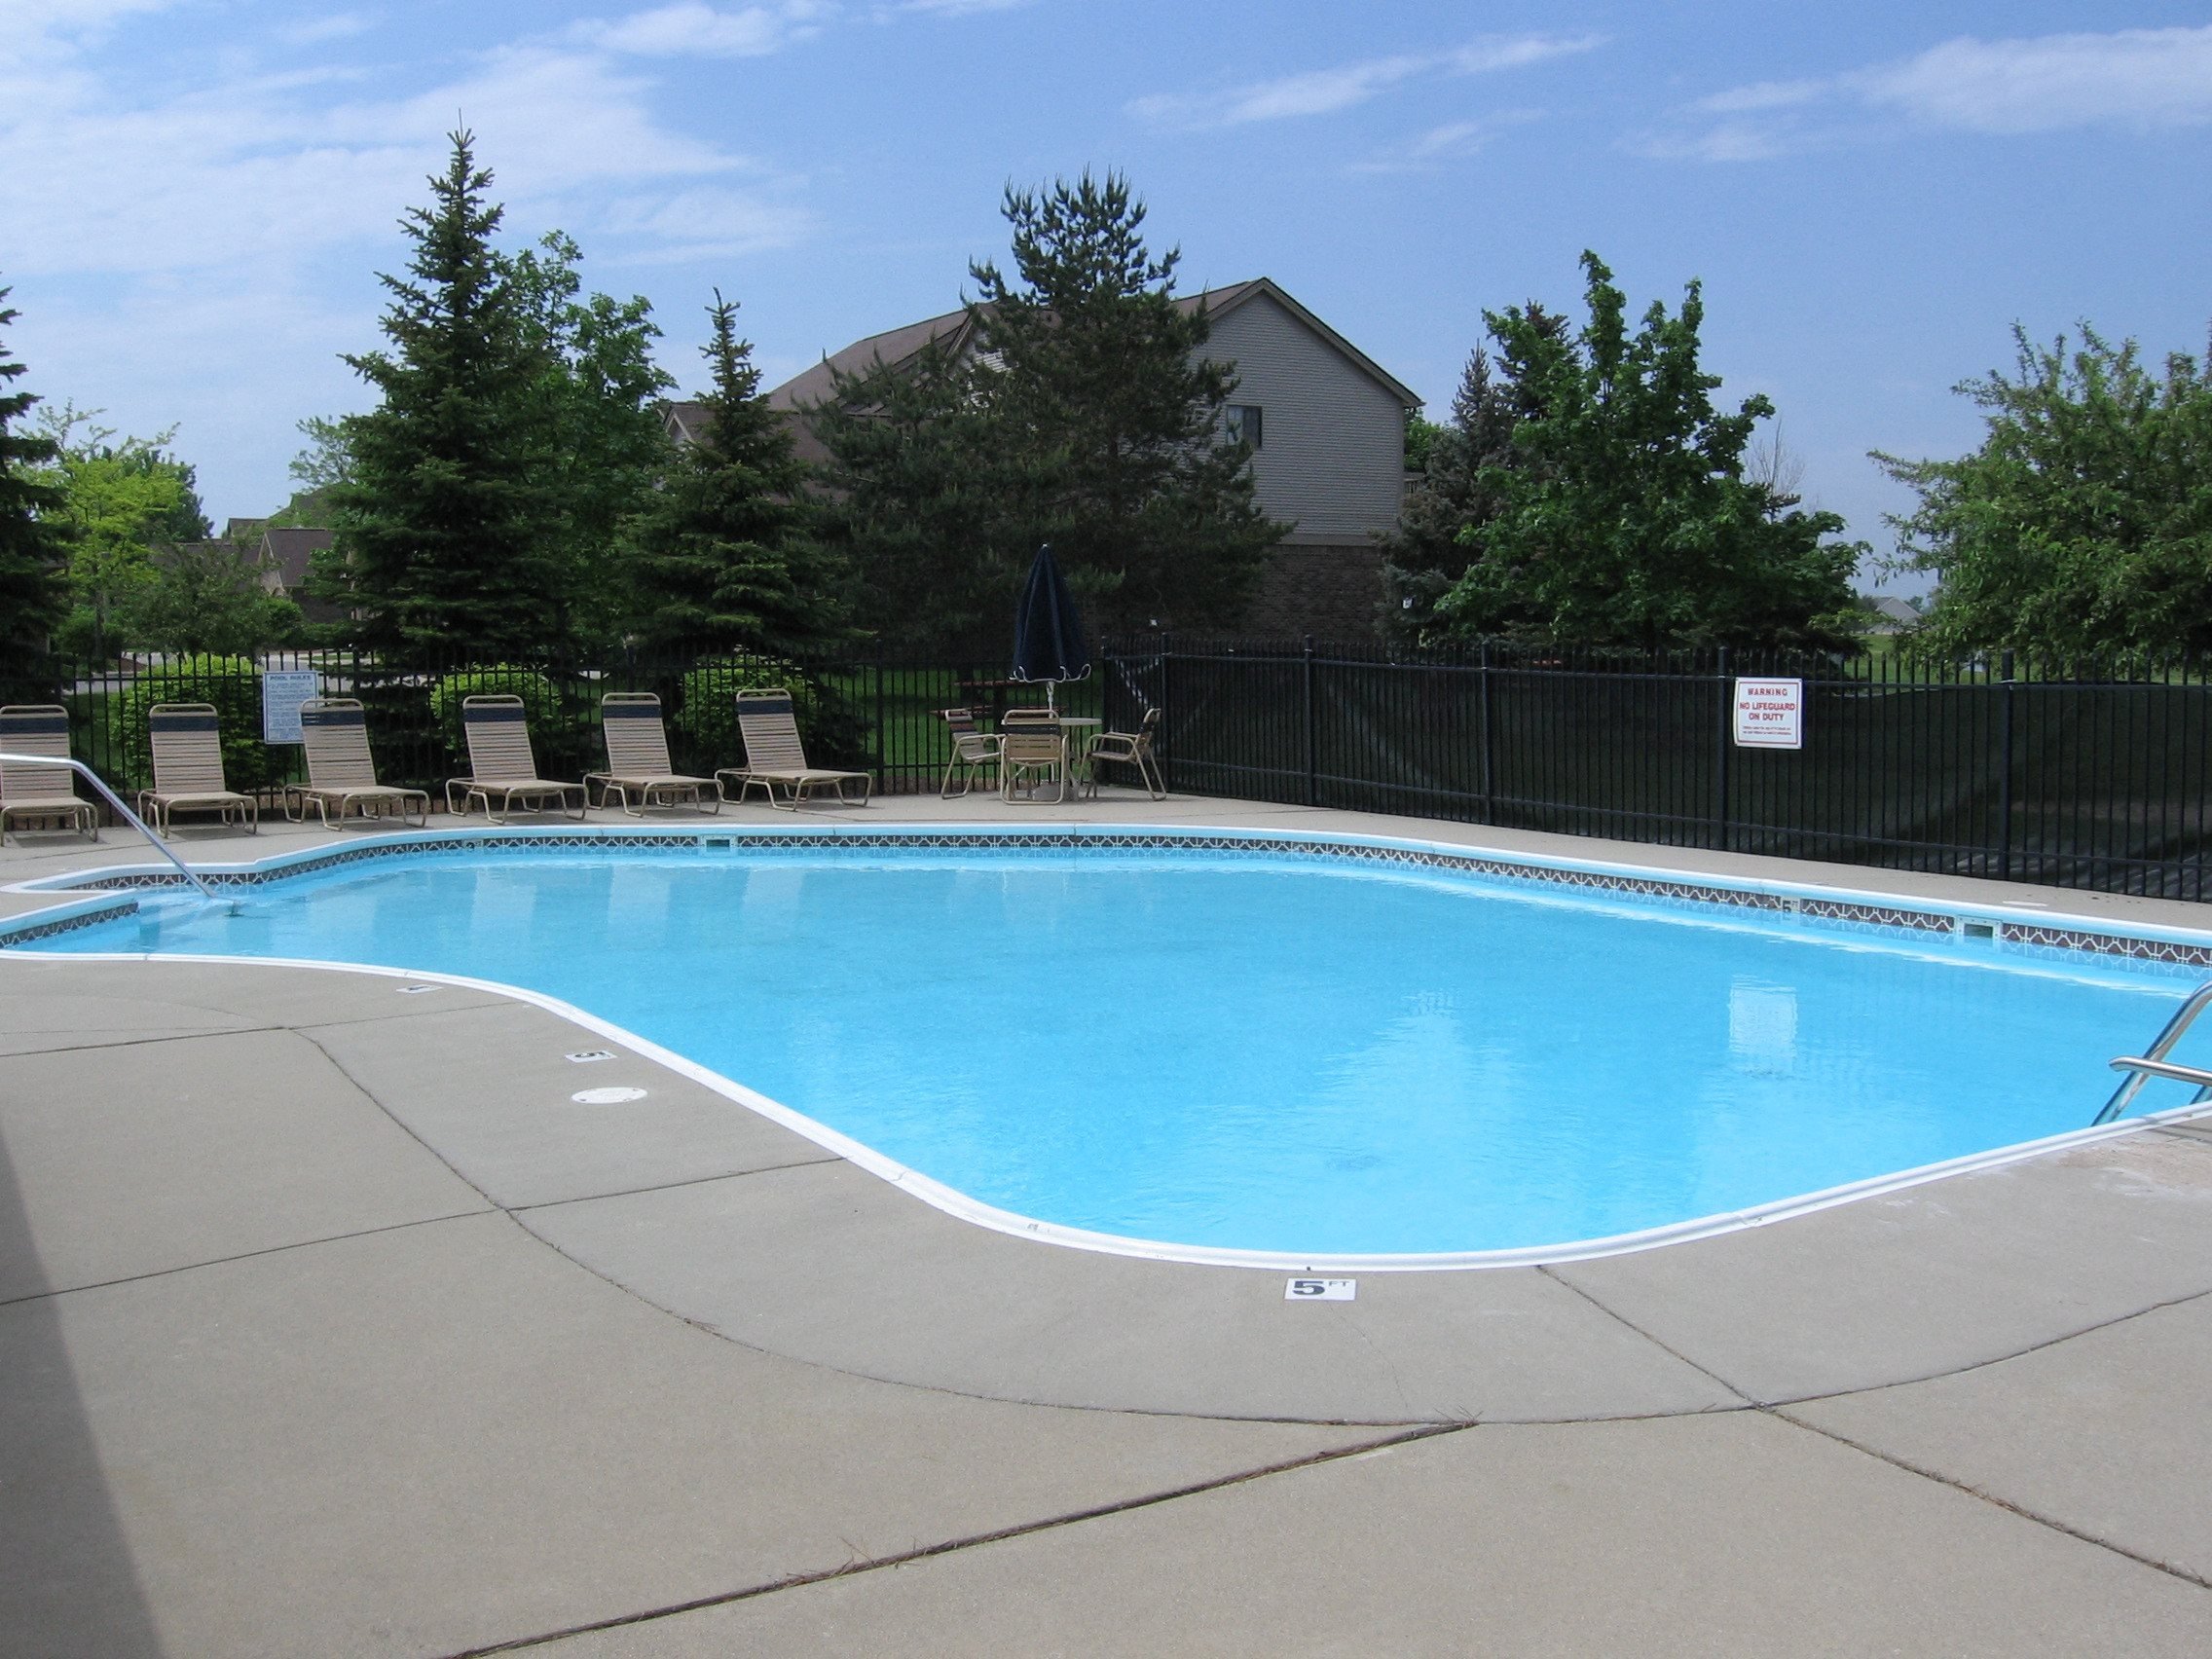 Heated Pool, with plenty of lounge chair sunning, umbrella tables, and shower locker rooms and private restrooms. The Playground and picnic area is located just outside the pool area.